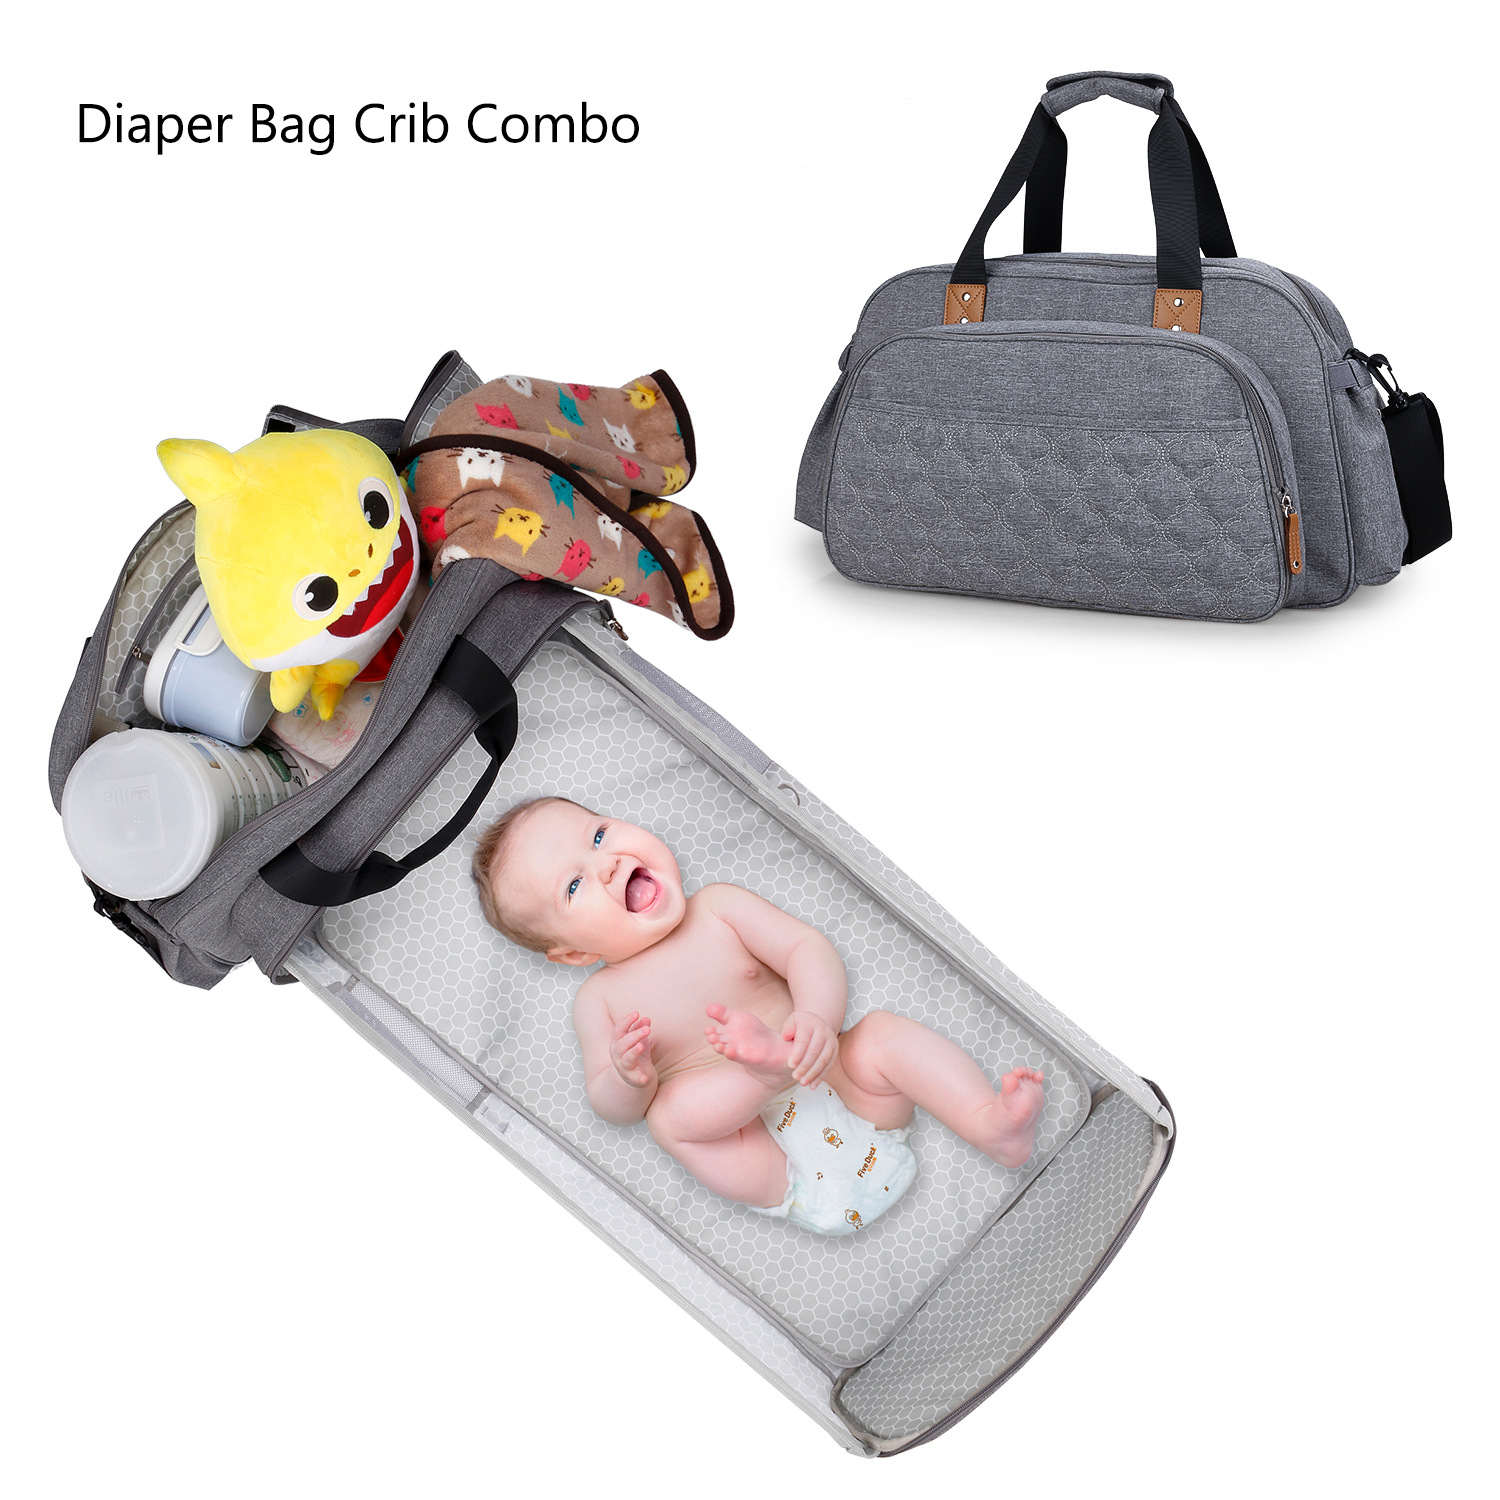 This Diaper Bag Can Hold a Stanley Cup! - Beauty, Baby, and a Budget